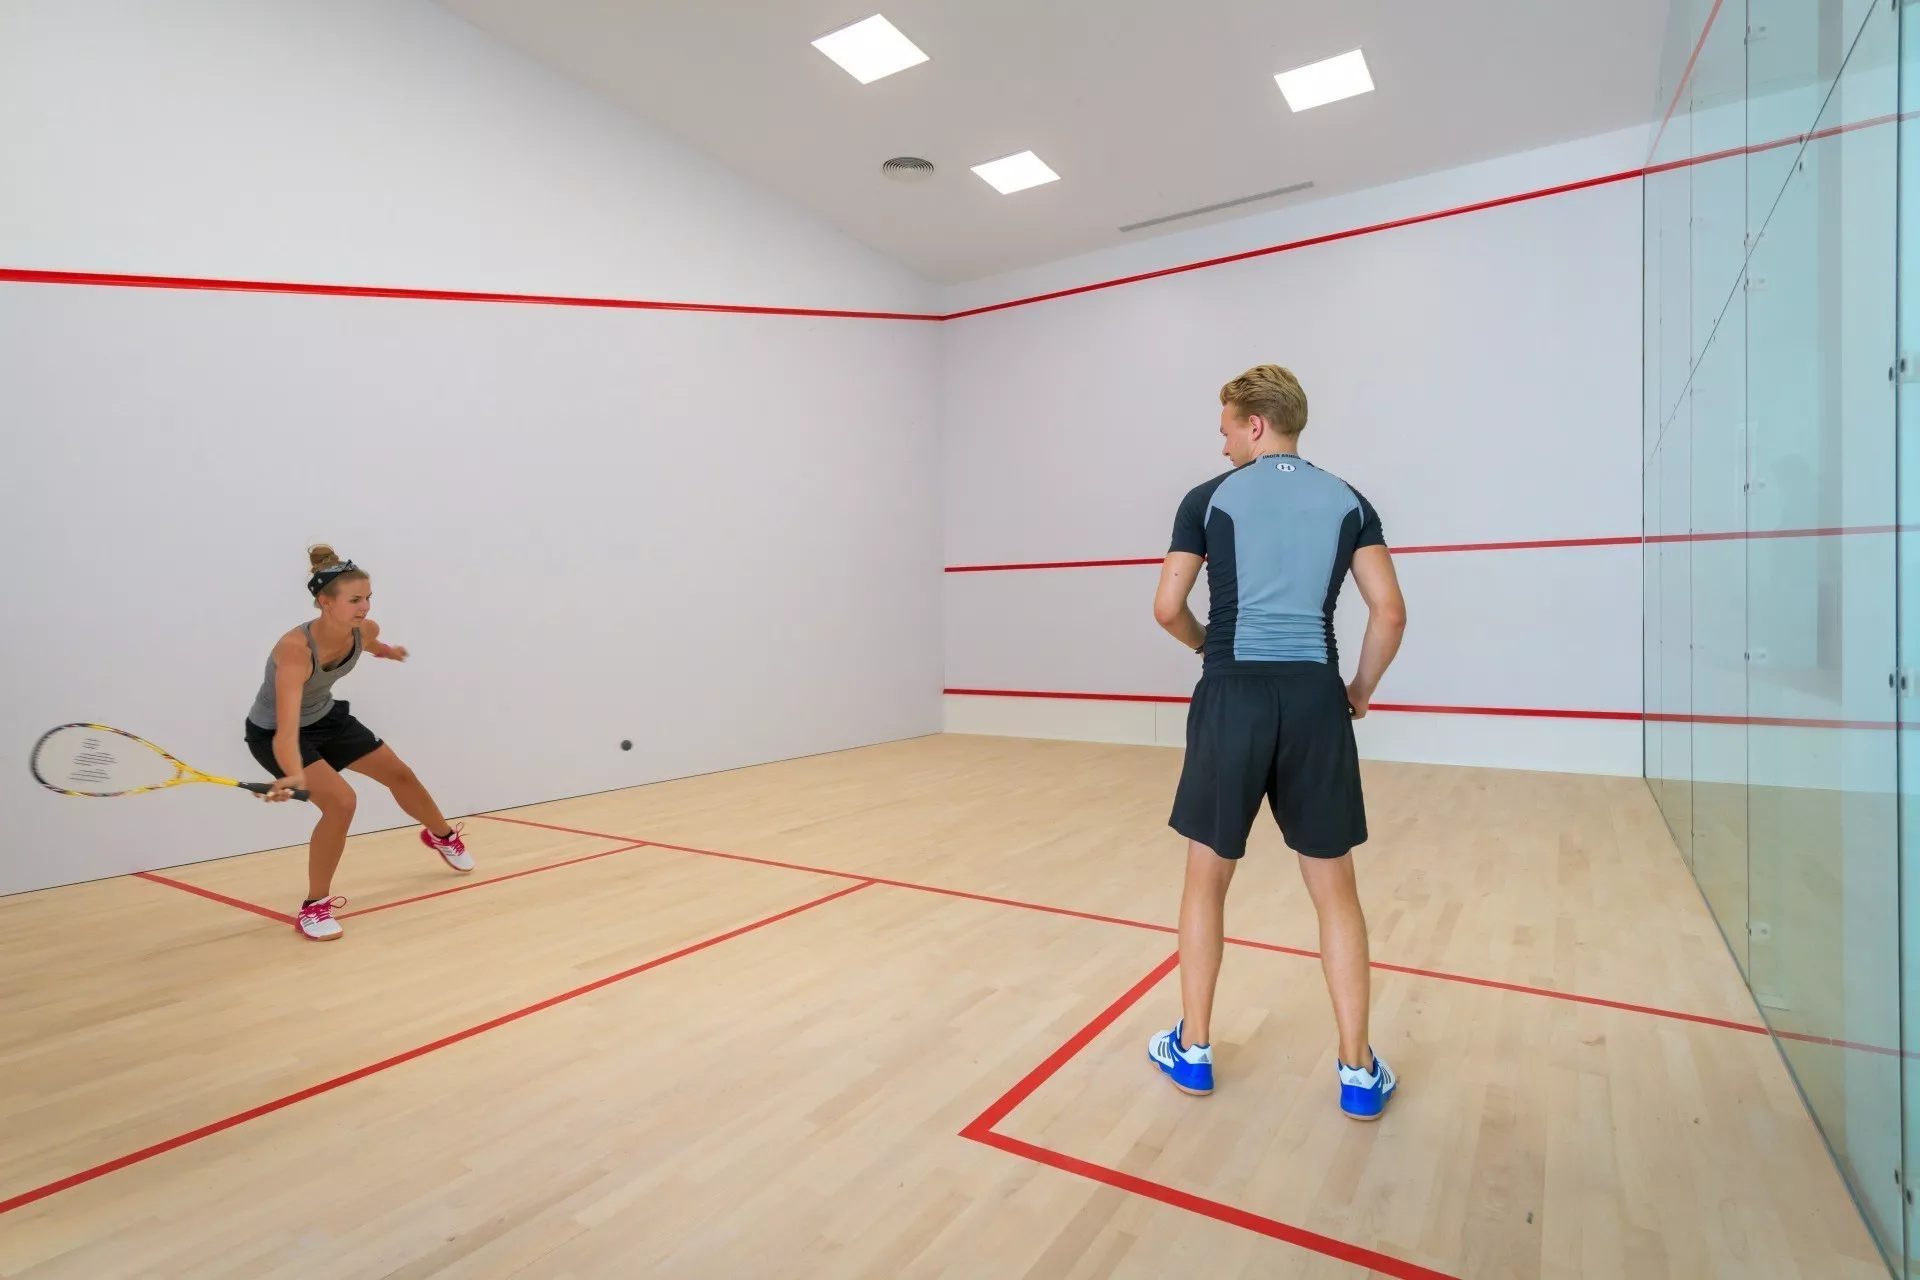 Le Break Sportif in France, Europe | Squash - Rated 5.9